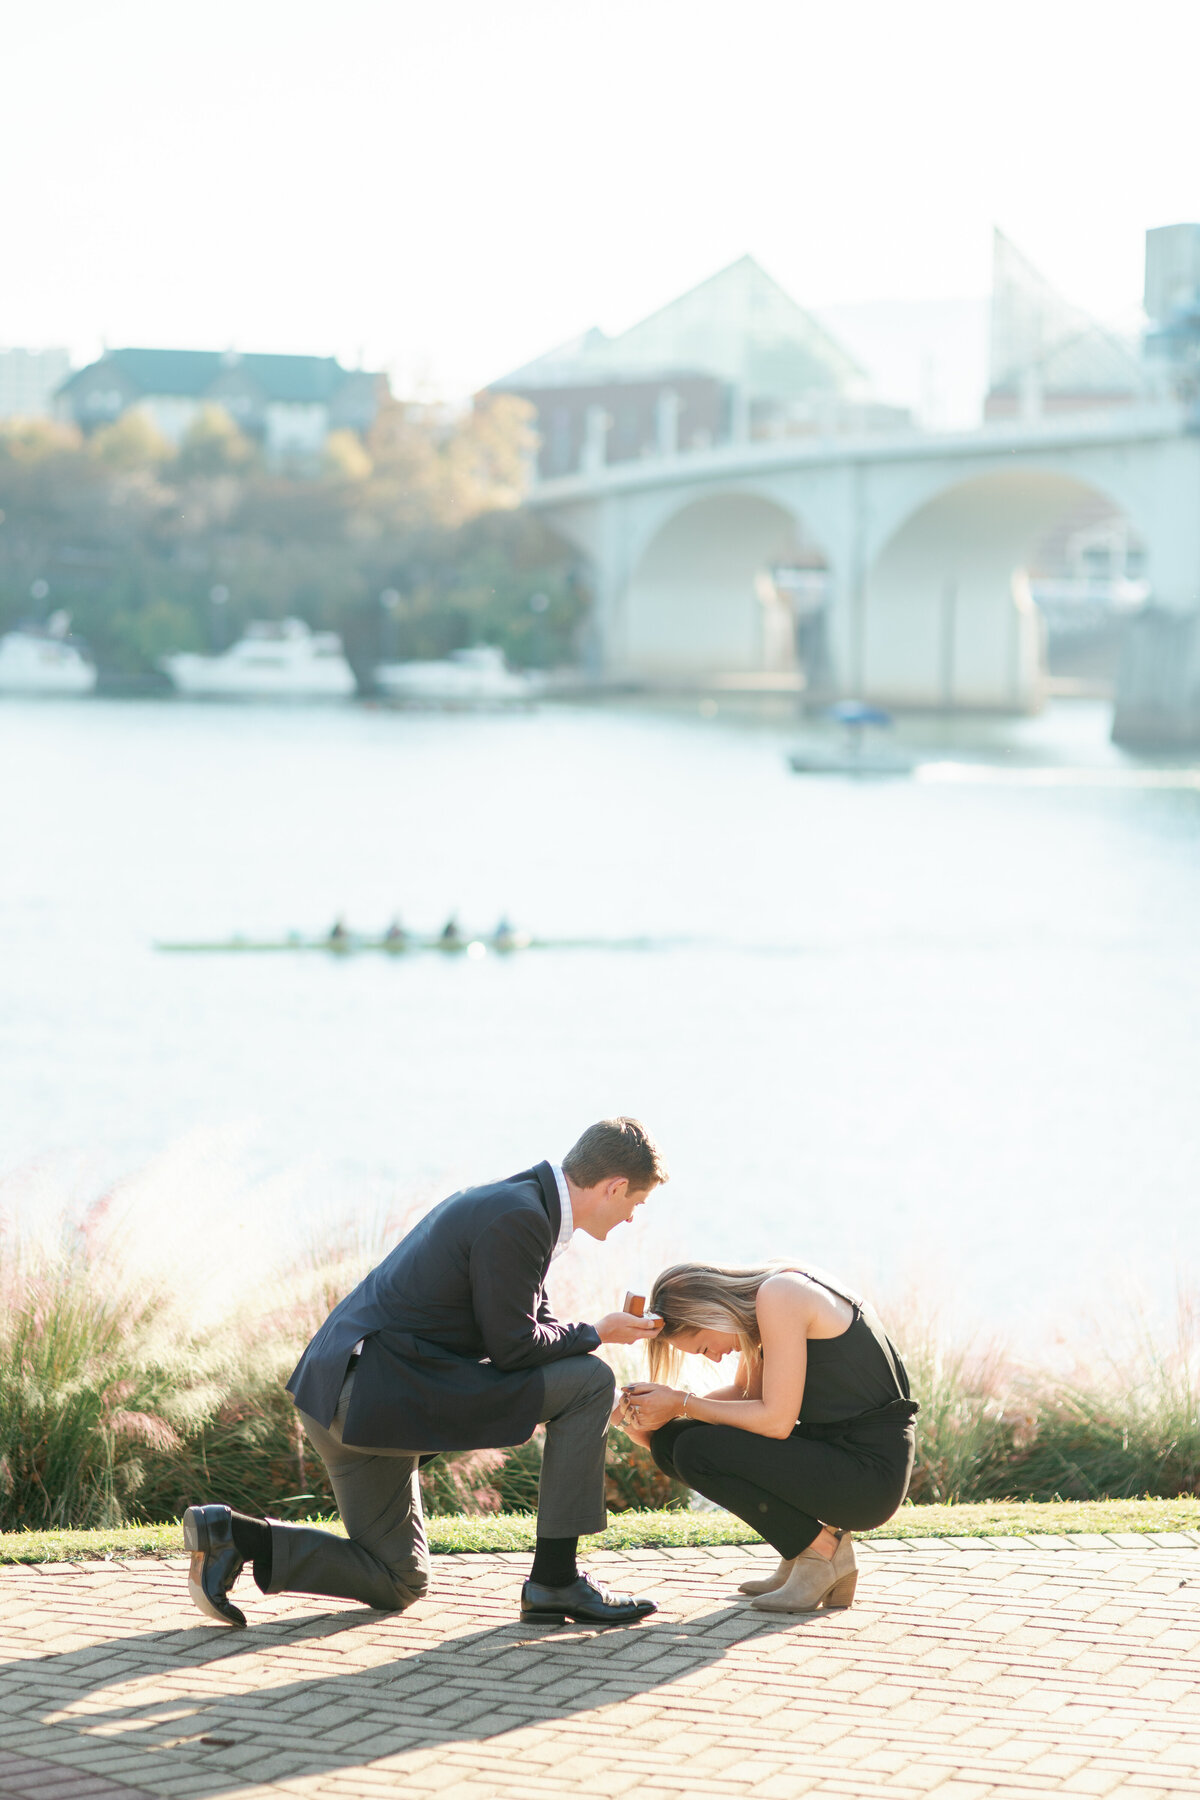 Wesley and Ellie Proposal - Coolidge Park, Chattanooga Tennessee - World Wide Engagement Photographer - Alaina René Photography-8